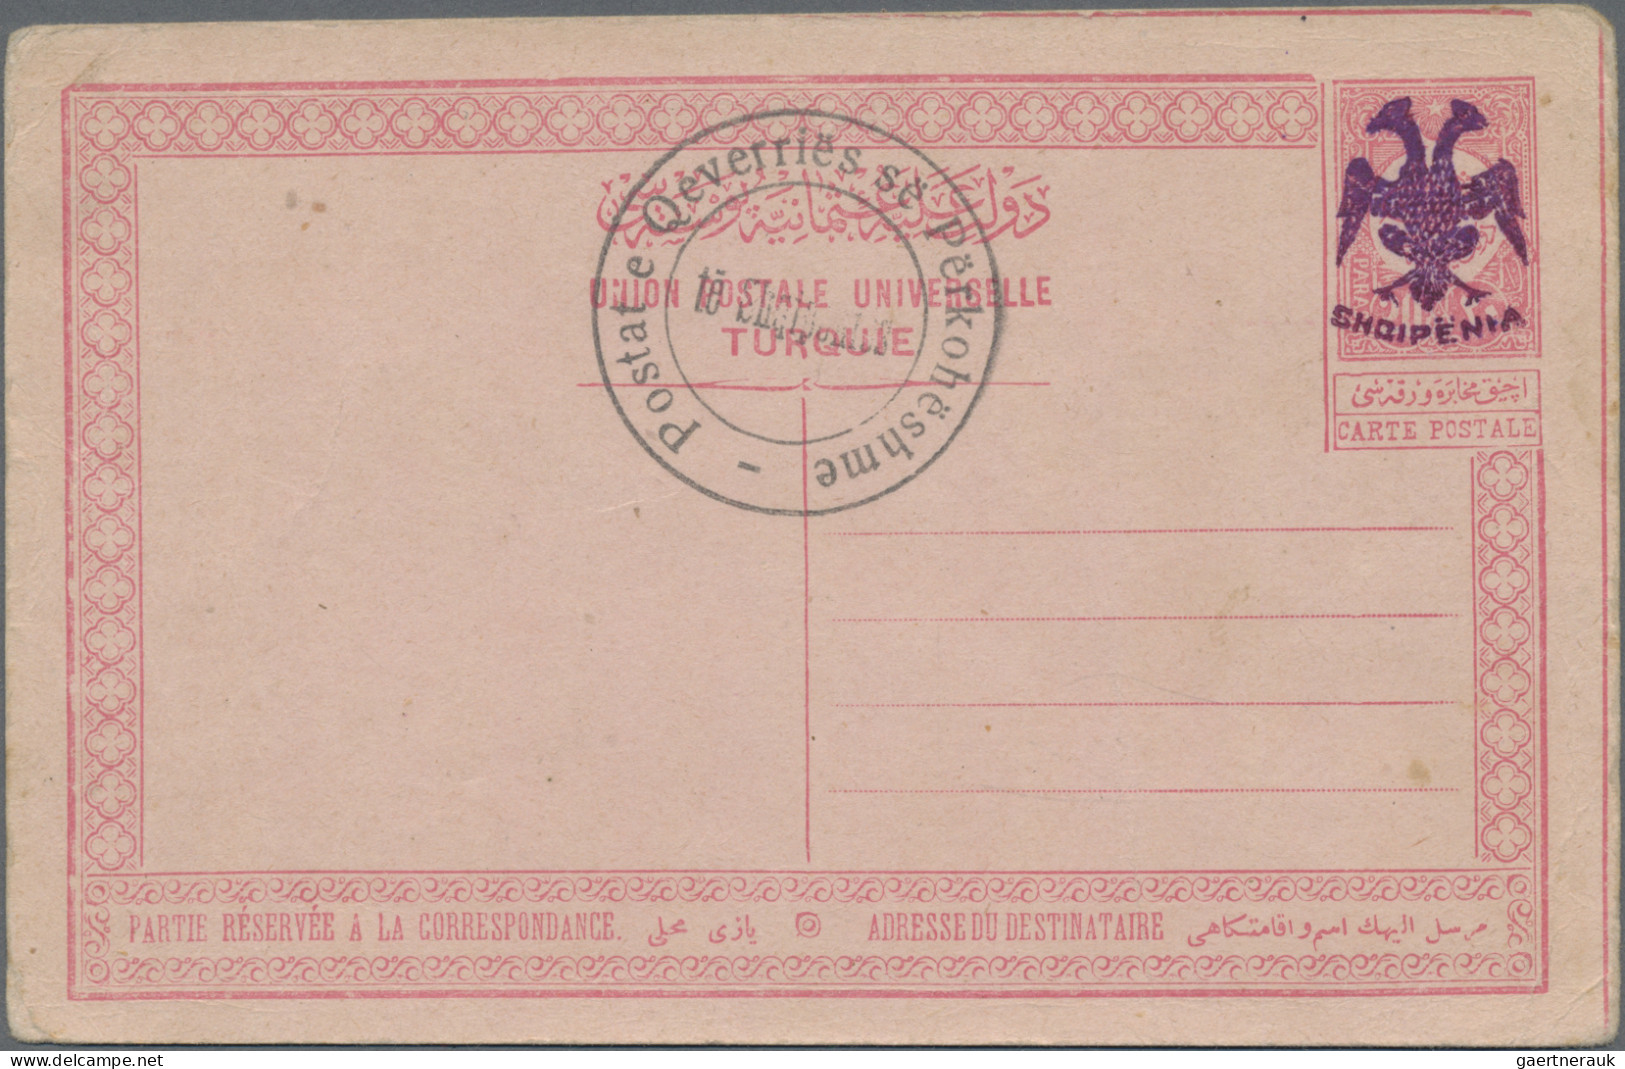 Albania - Postal Stationery: 1913, Two Turkisch Post Cards, One 20 Para Rose One - Albania